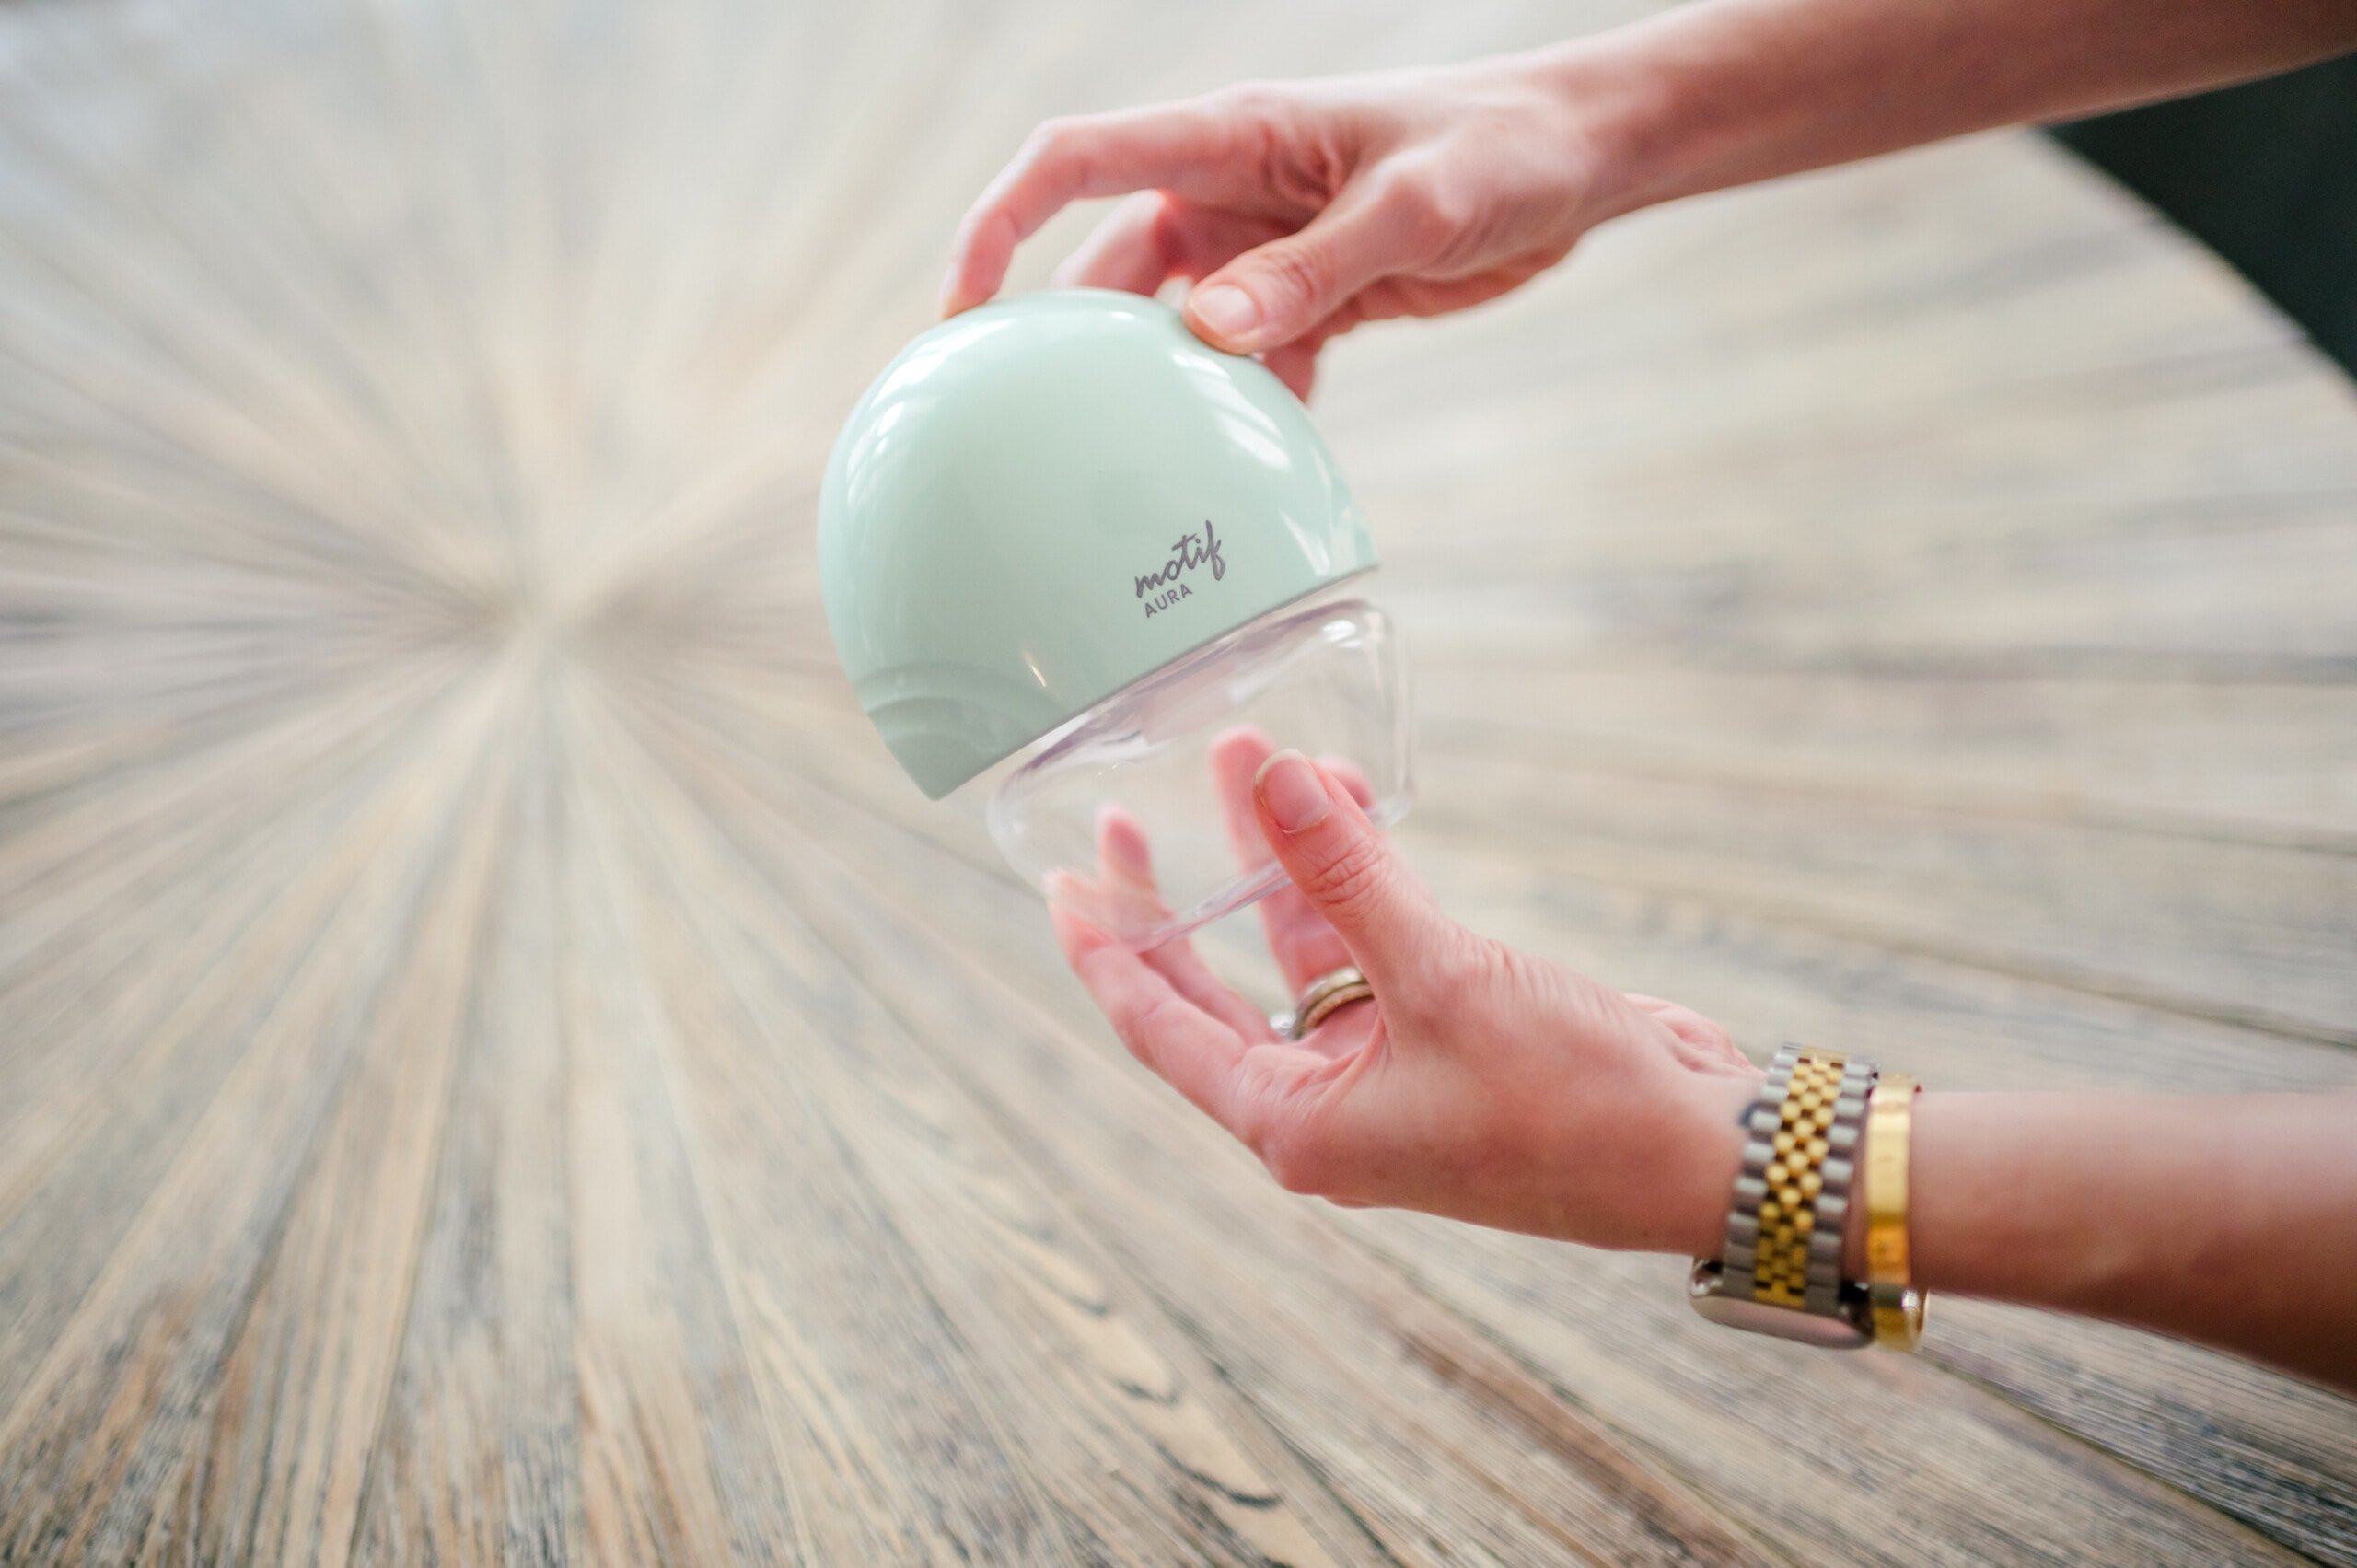 Hands holding one of the Motif Aura breast pumps